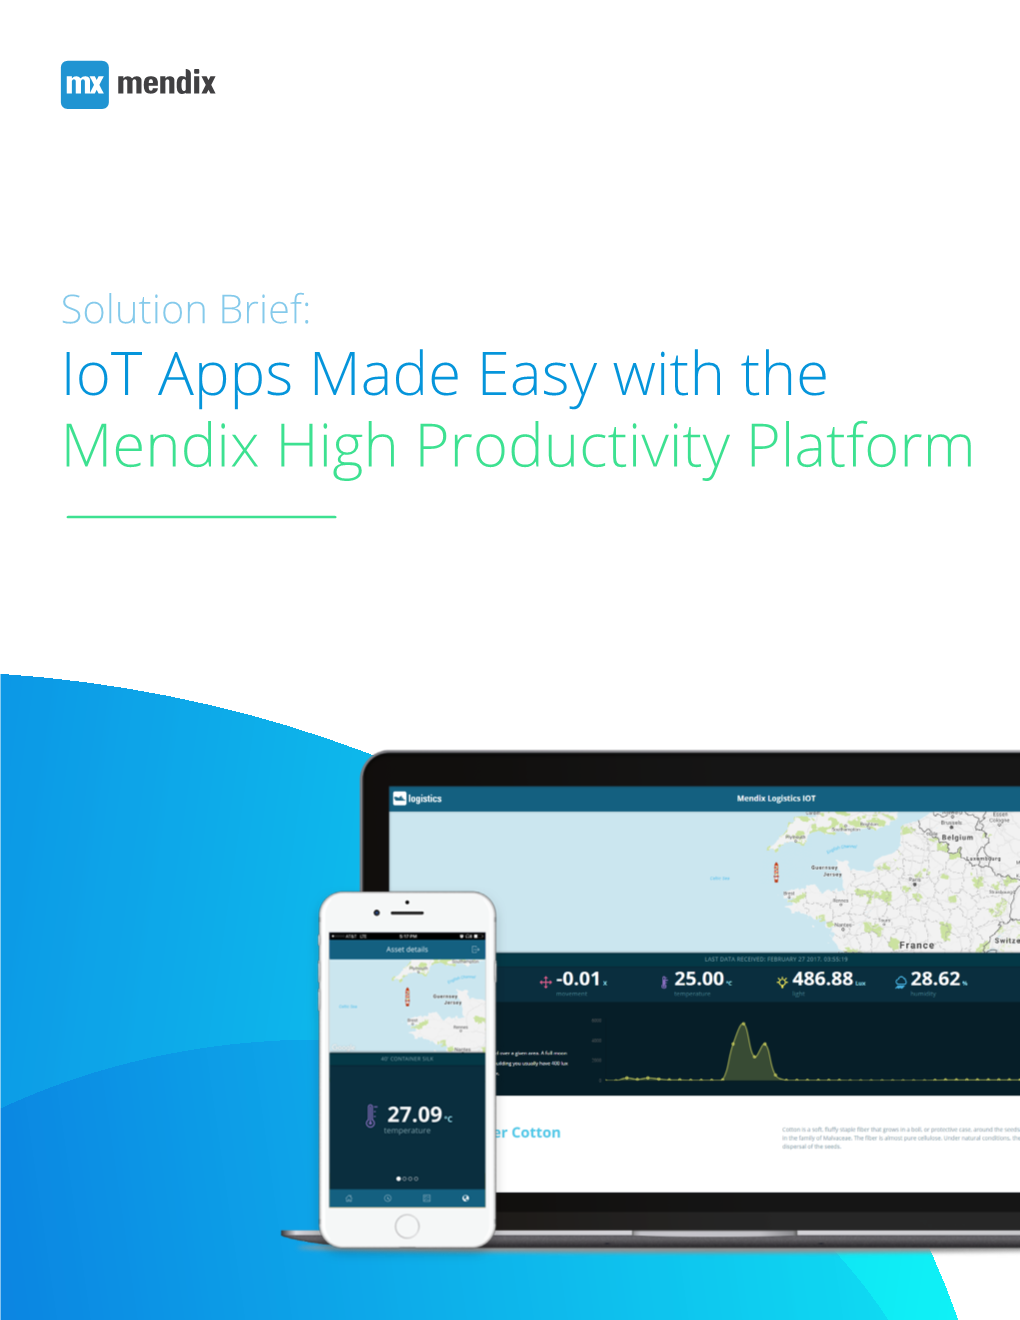 Iot Apps Made Easy with the Mendix High Productivity Platform Are You Ready for Iot?